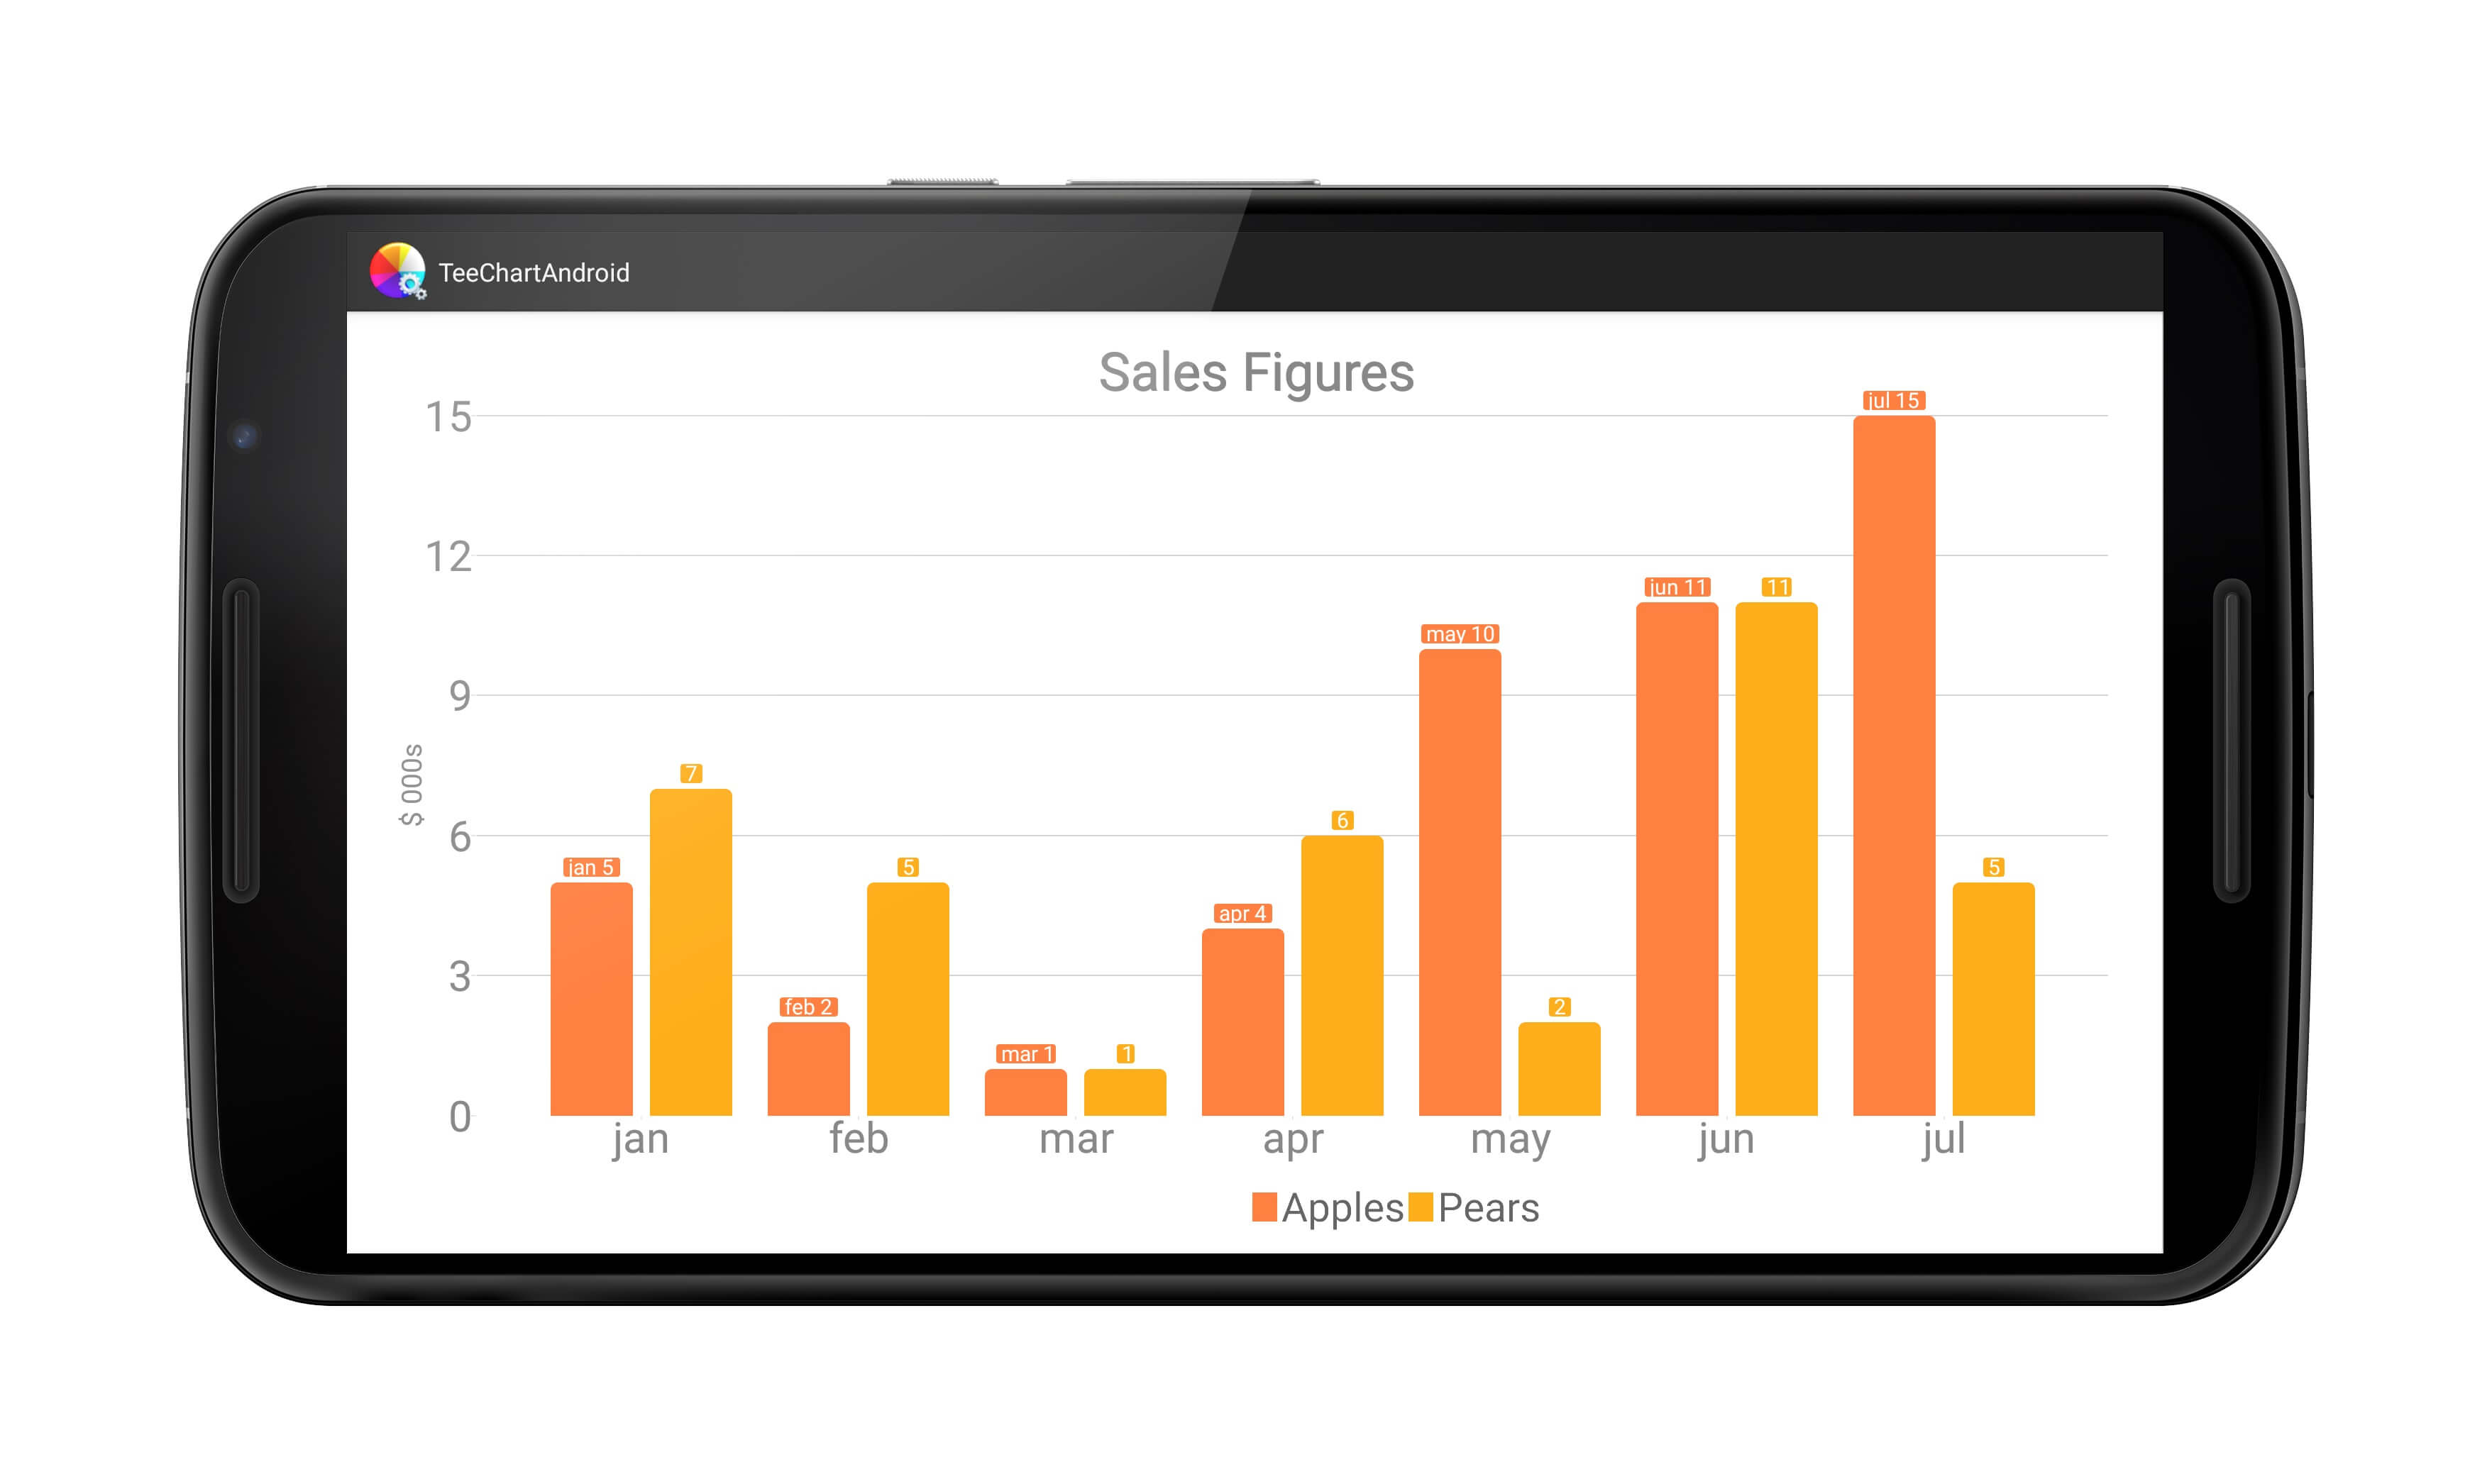 Sales figures performance on an Android device.